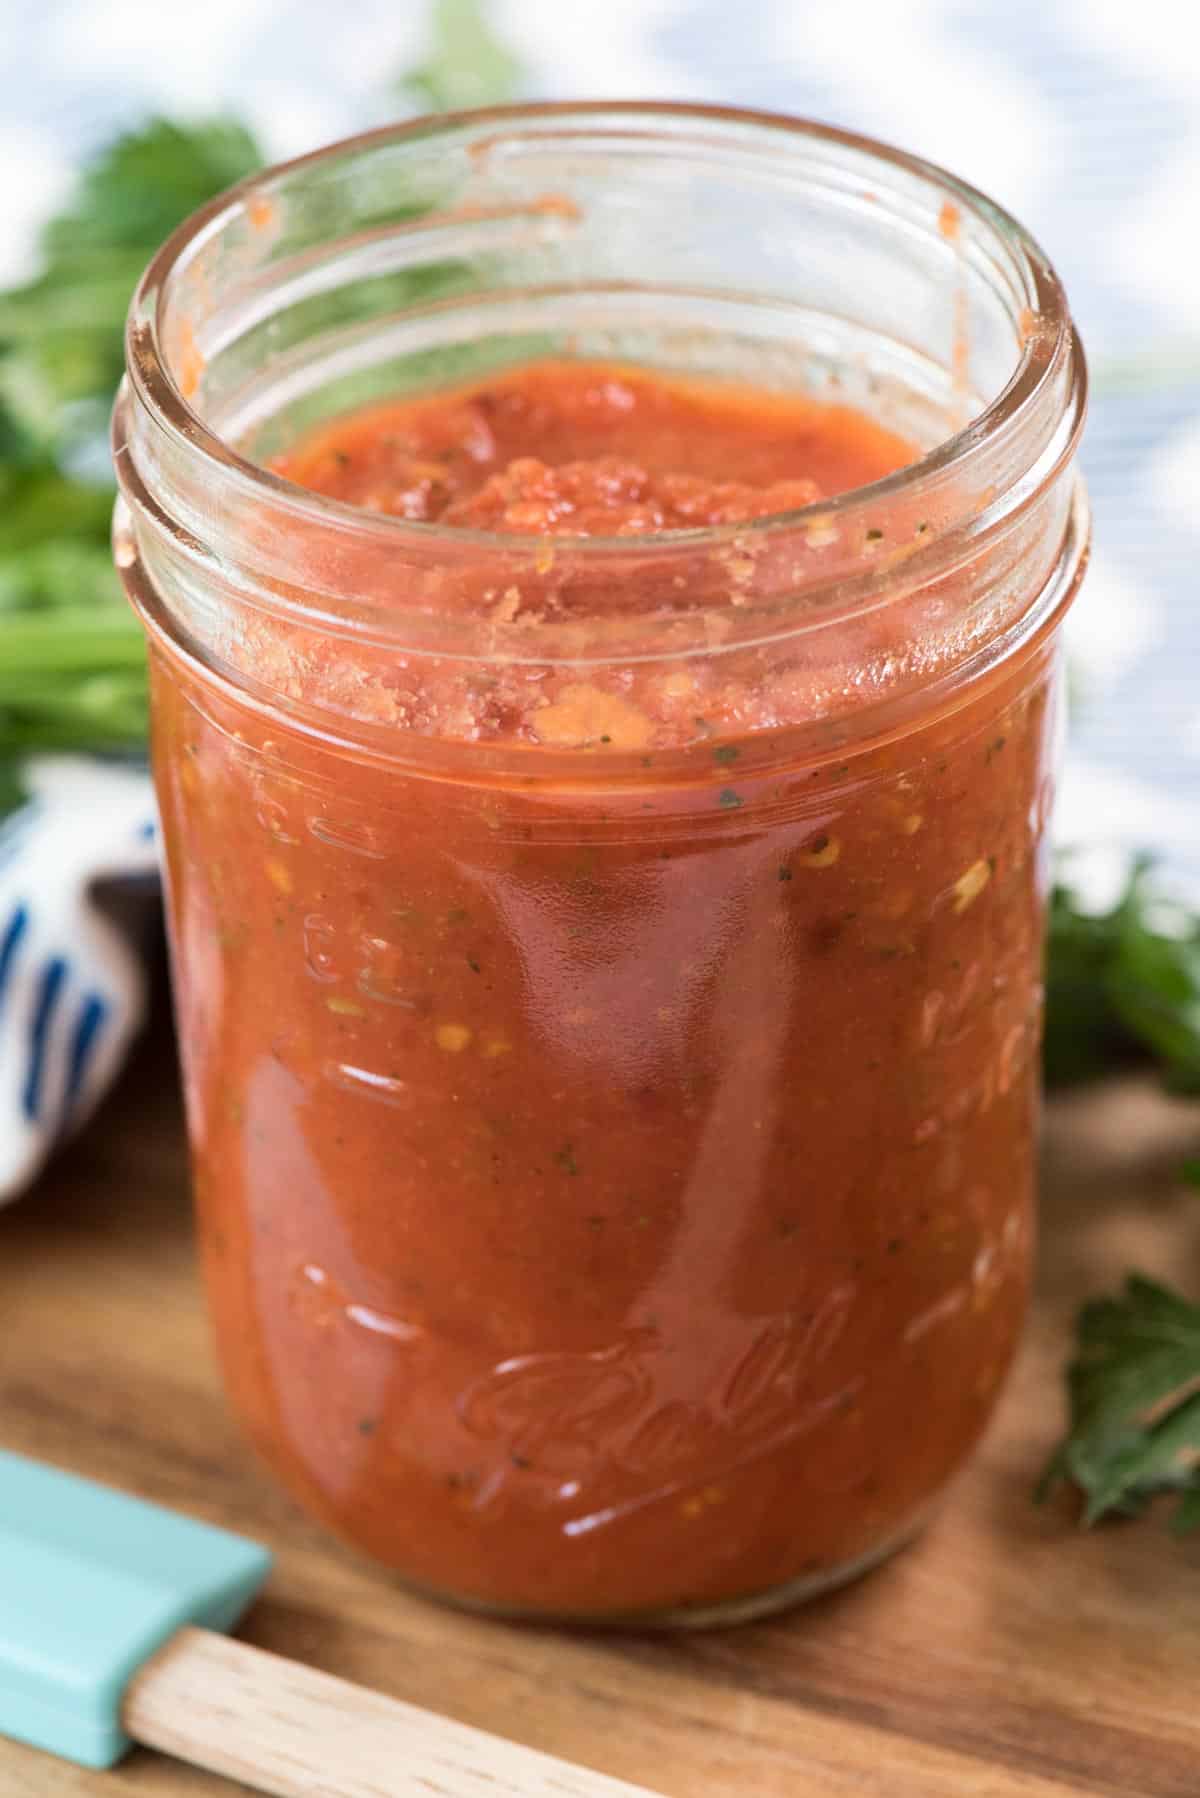 5-minute Homemade Pizza Sauce Recipe - Crazy for Crust